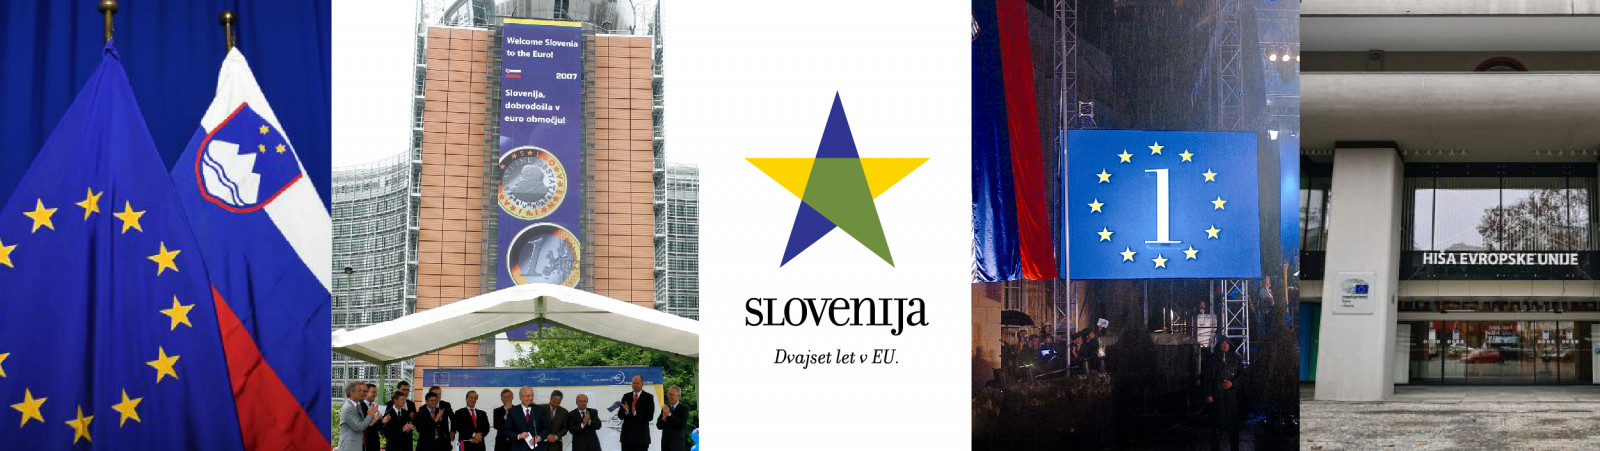 Collage of photos: European and Slovenian flag, welcome to Slovenia in 2007 upon entry into the European Union, a star with blue, red and green stripes and the inscription Slovenija Twenty years in the EU, counting down to Slovenia's entry into the EU, th